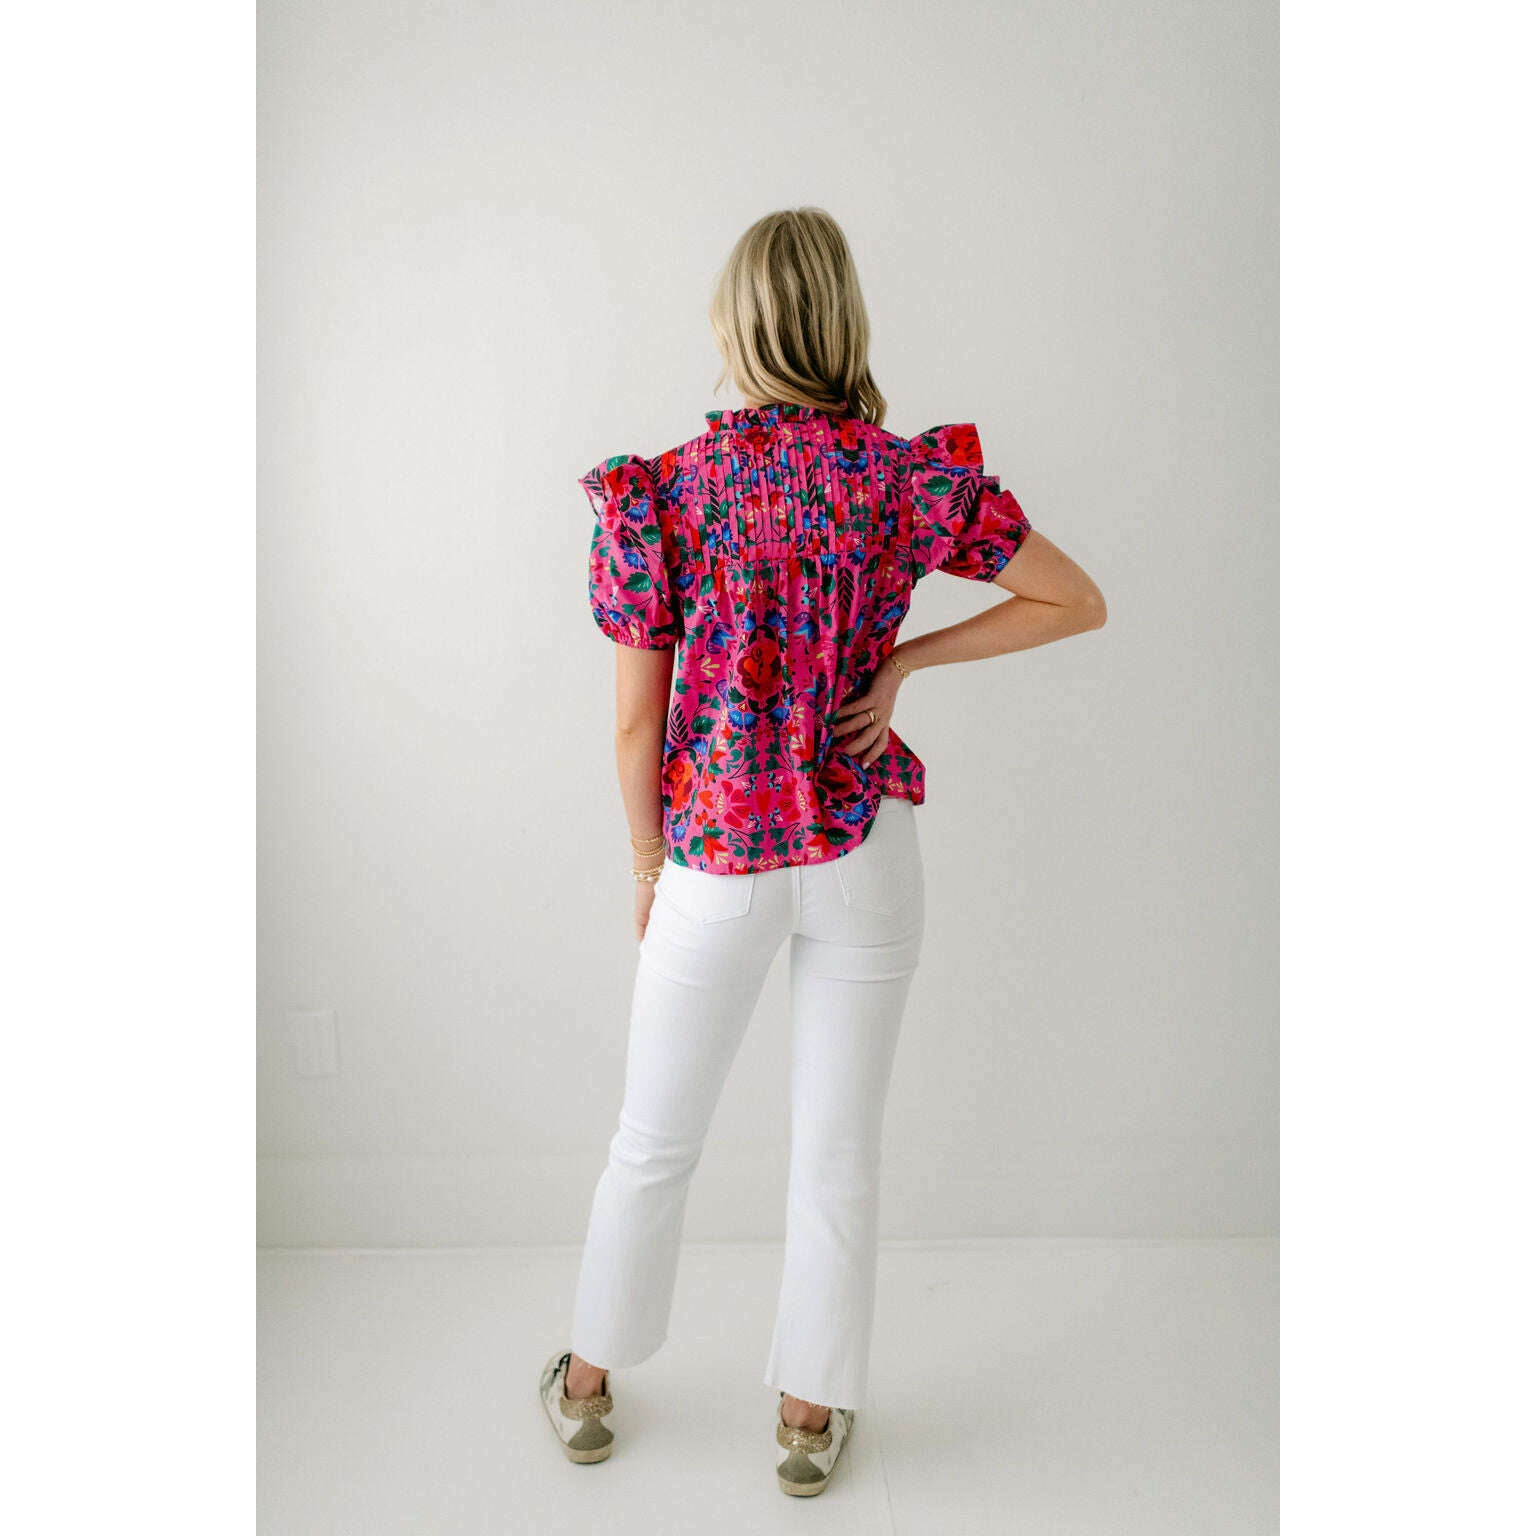 8.28 Boutique:Sincerely Ours,Sincerely Ours Sunrise Solstic Poplin Top,Tops